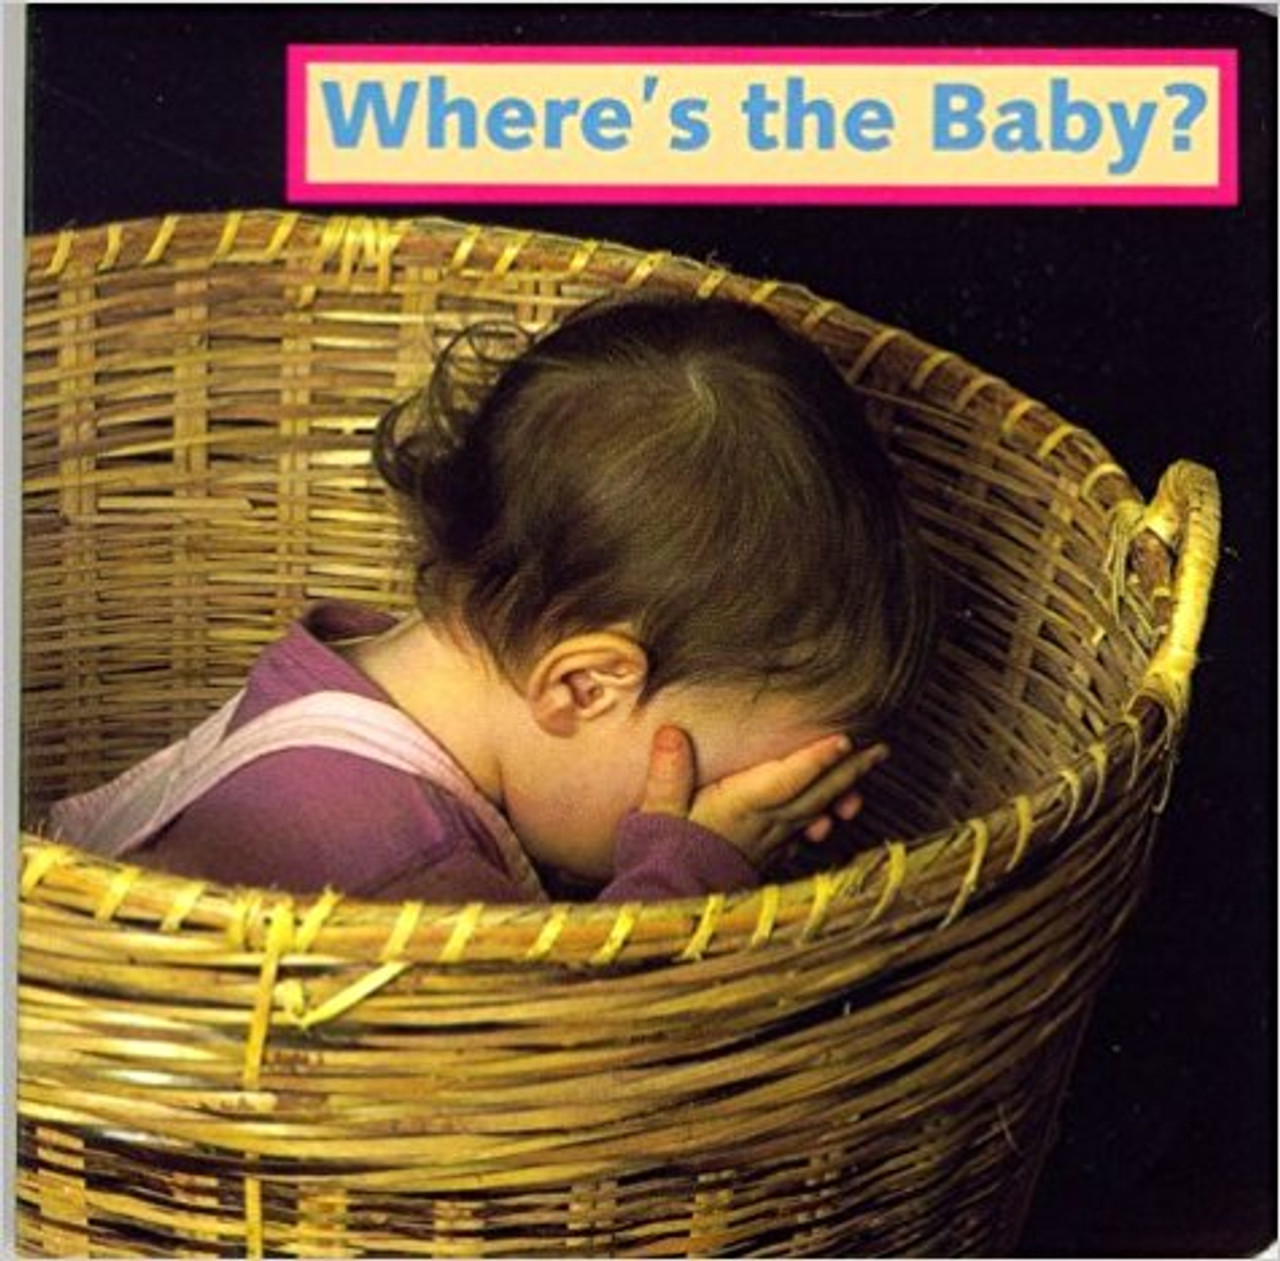 Where's the Baby? (Russian/English) by Cheryl Christian